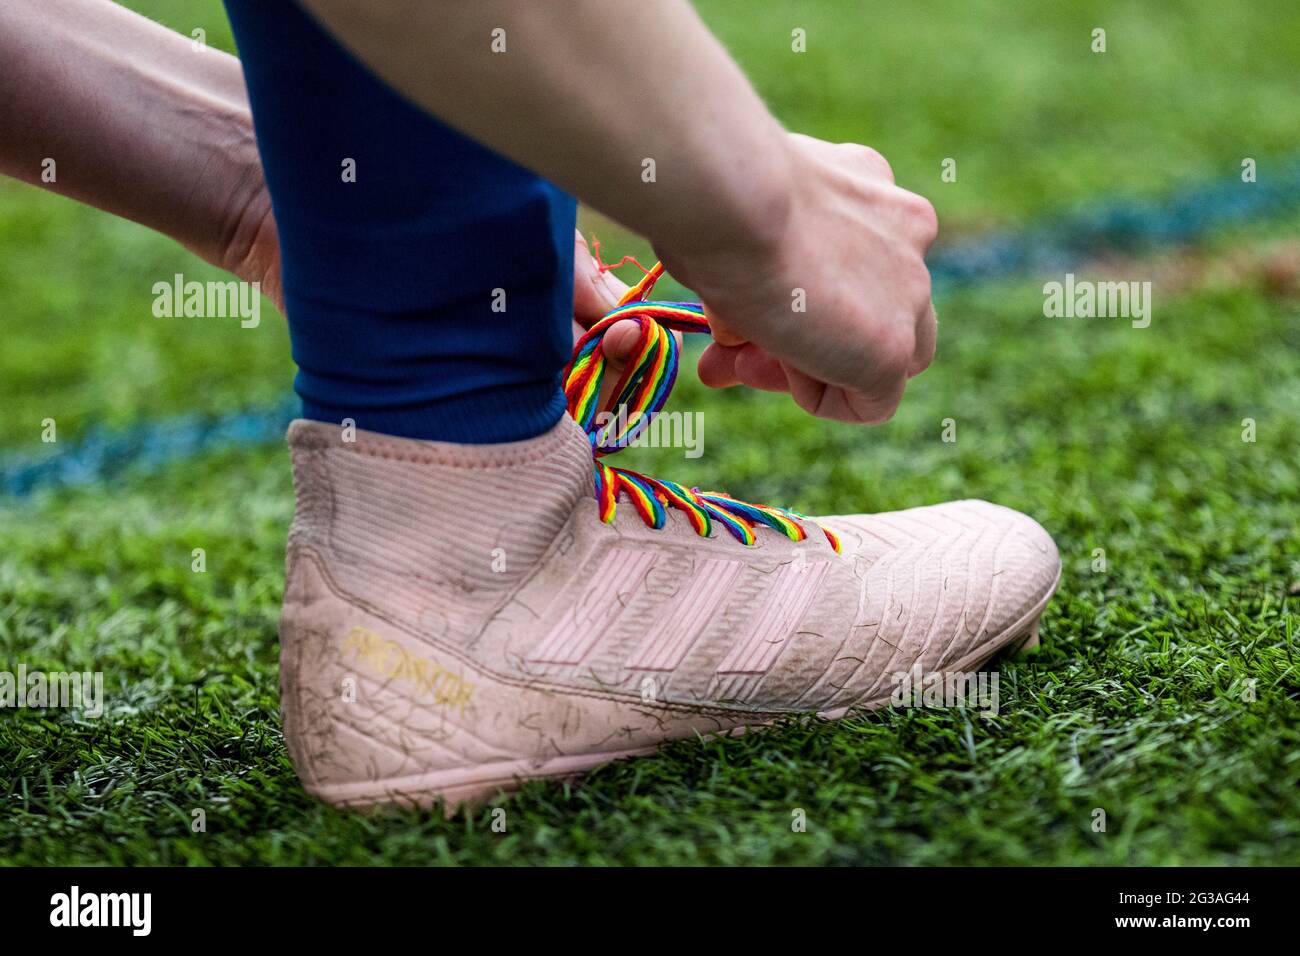 A footballer tying up Stonewall's Rainbow Laces on an Adidas